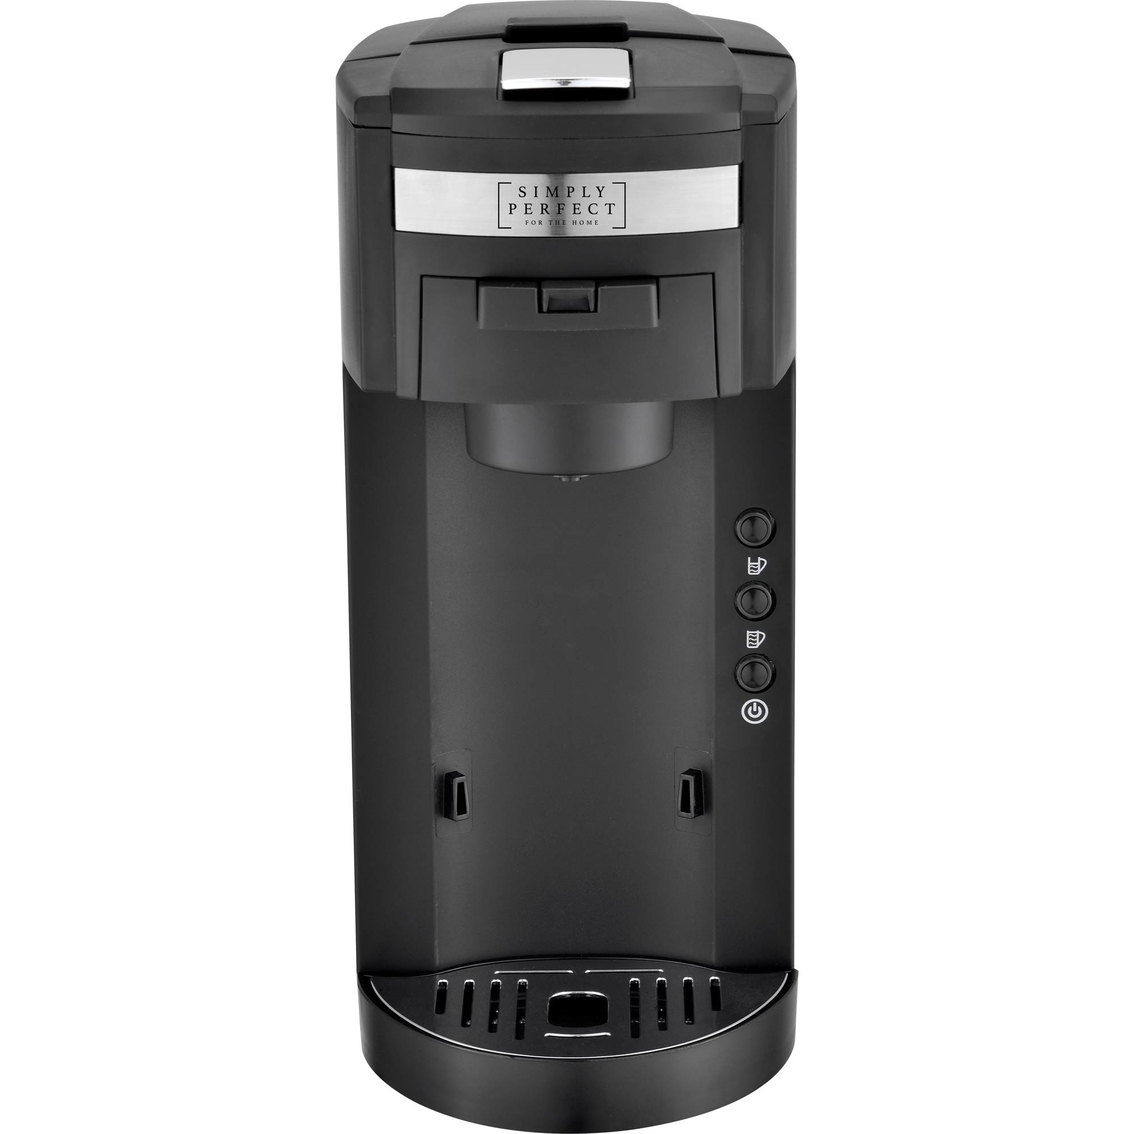 Simply Perfect Single Serve Coffee Maker 220V - Image 3 of 3